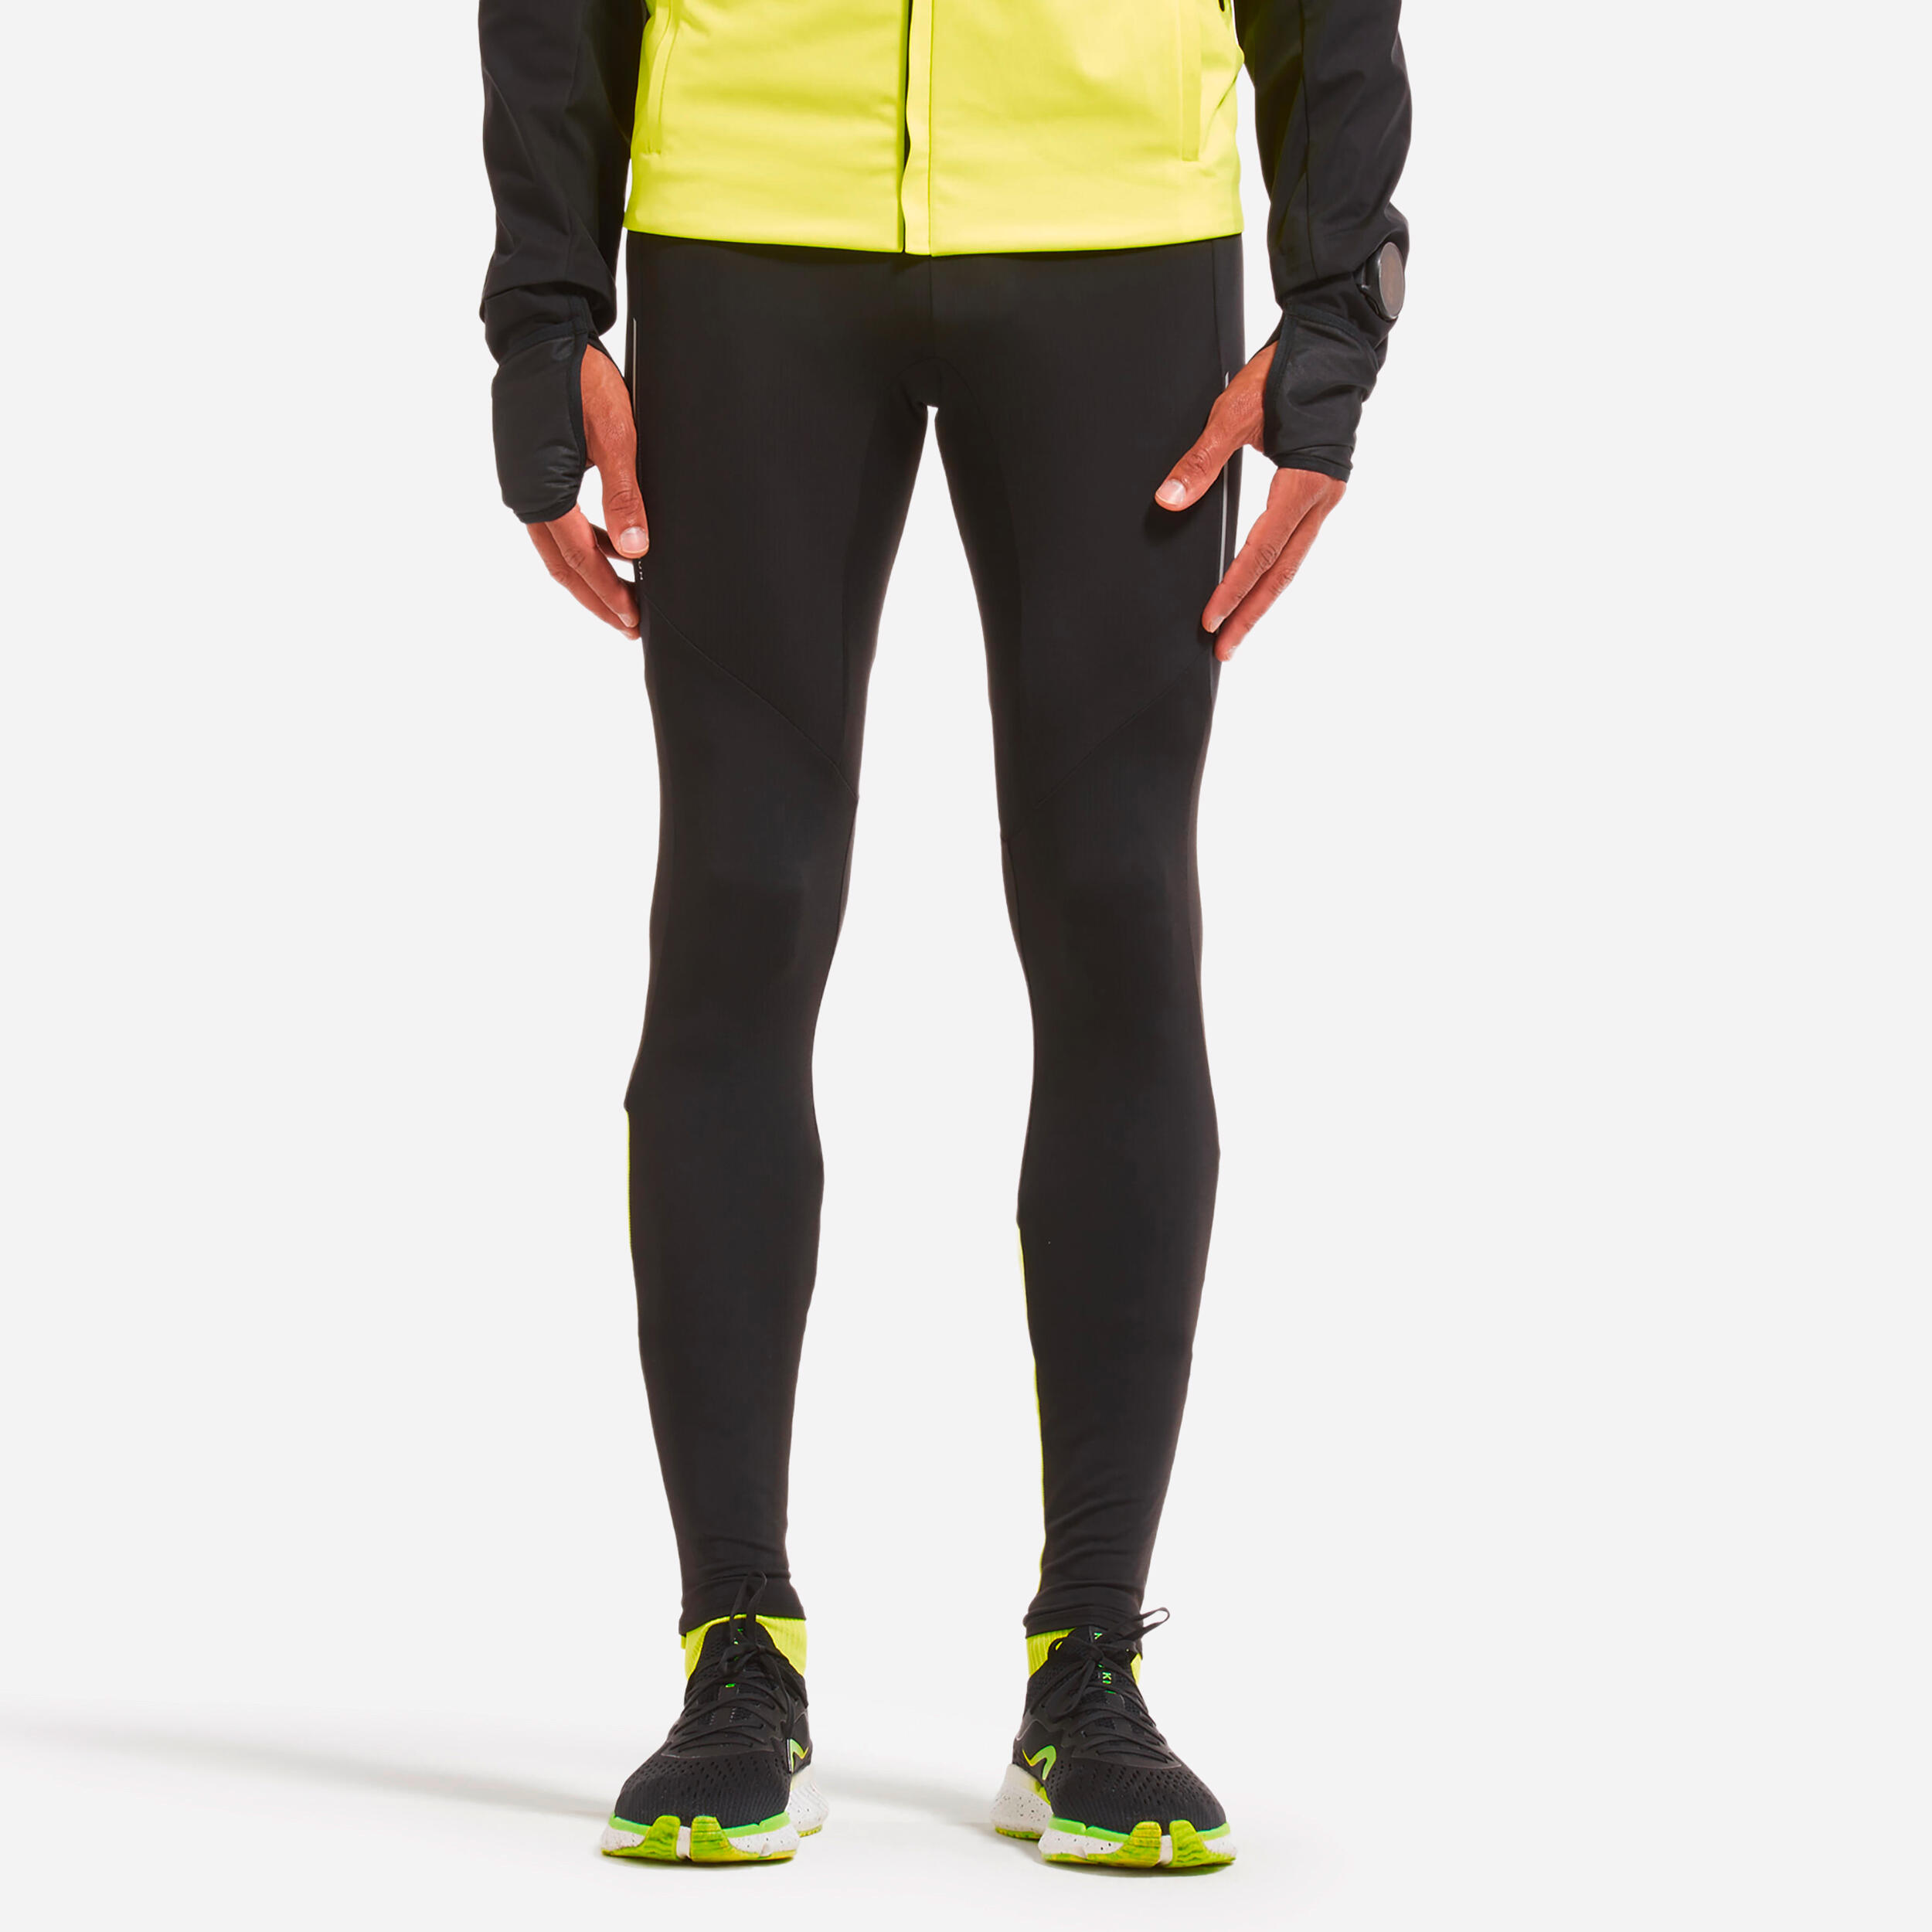 Under Armour Womens Armour Graphic Legging, Black / Lime Yellow